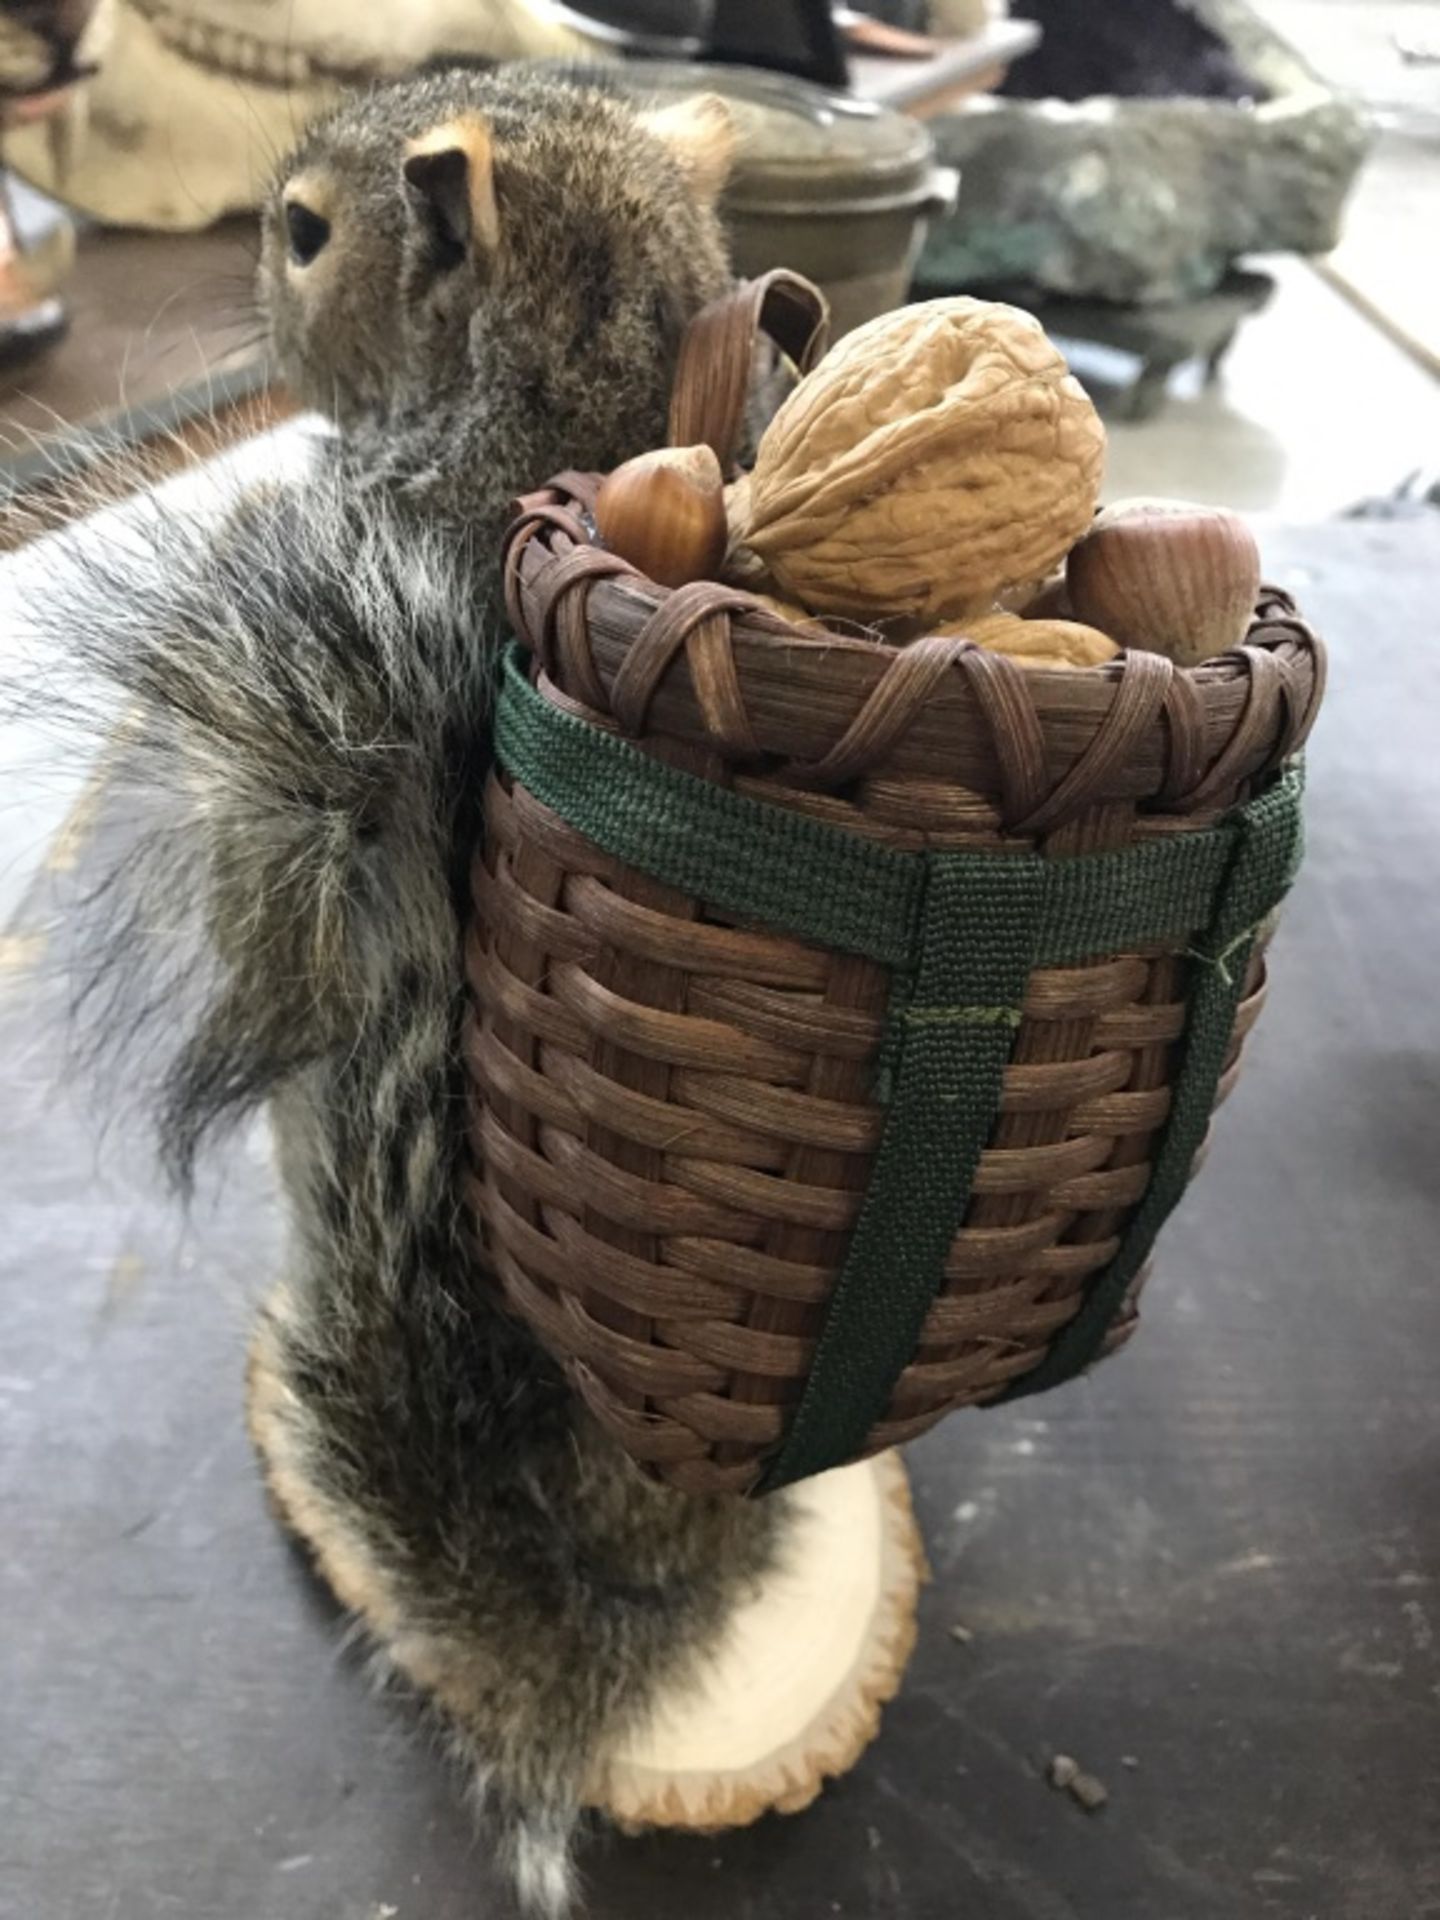 Squirrel, Back Packing - Image 12 of 13